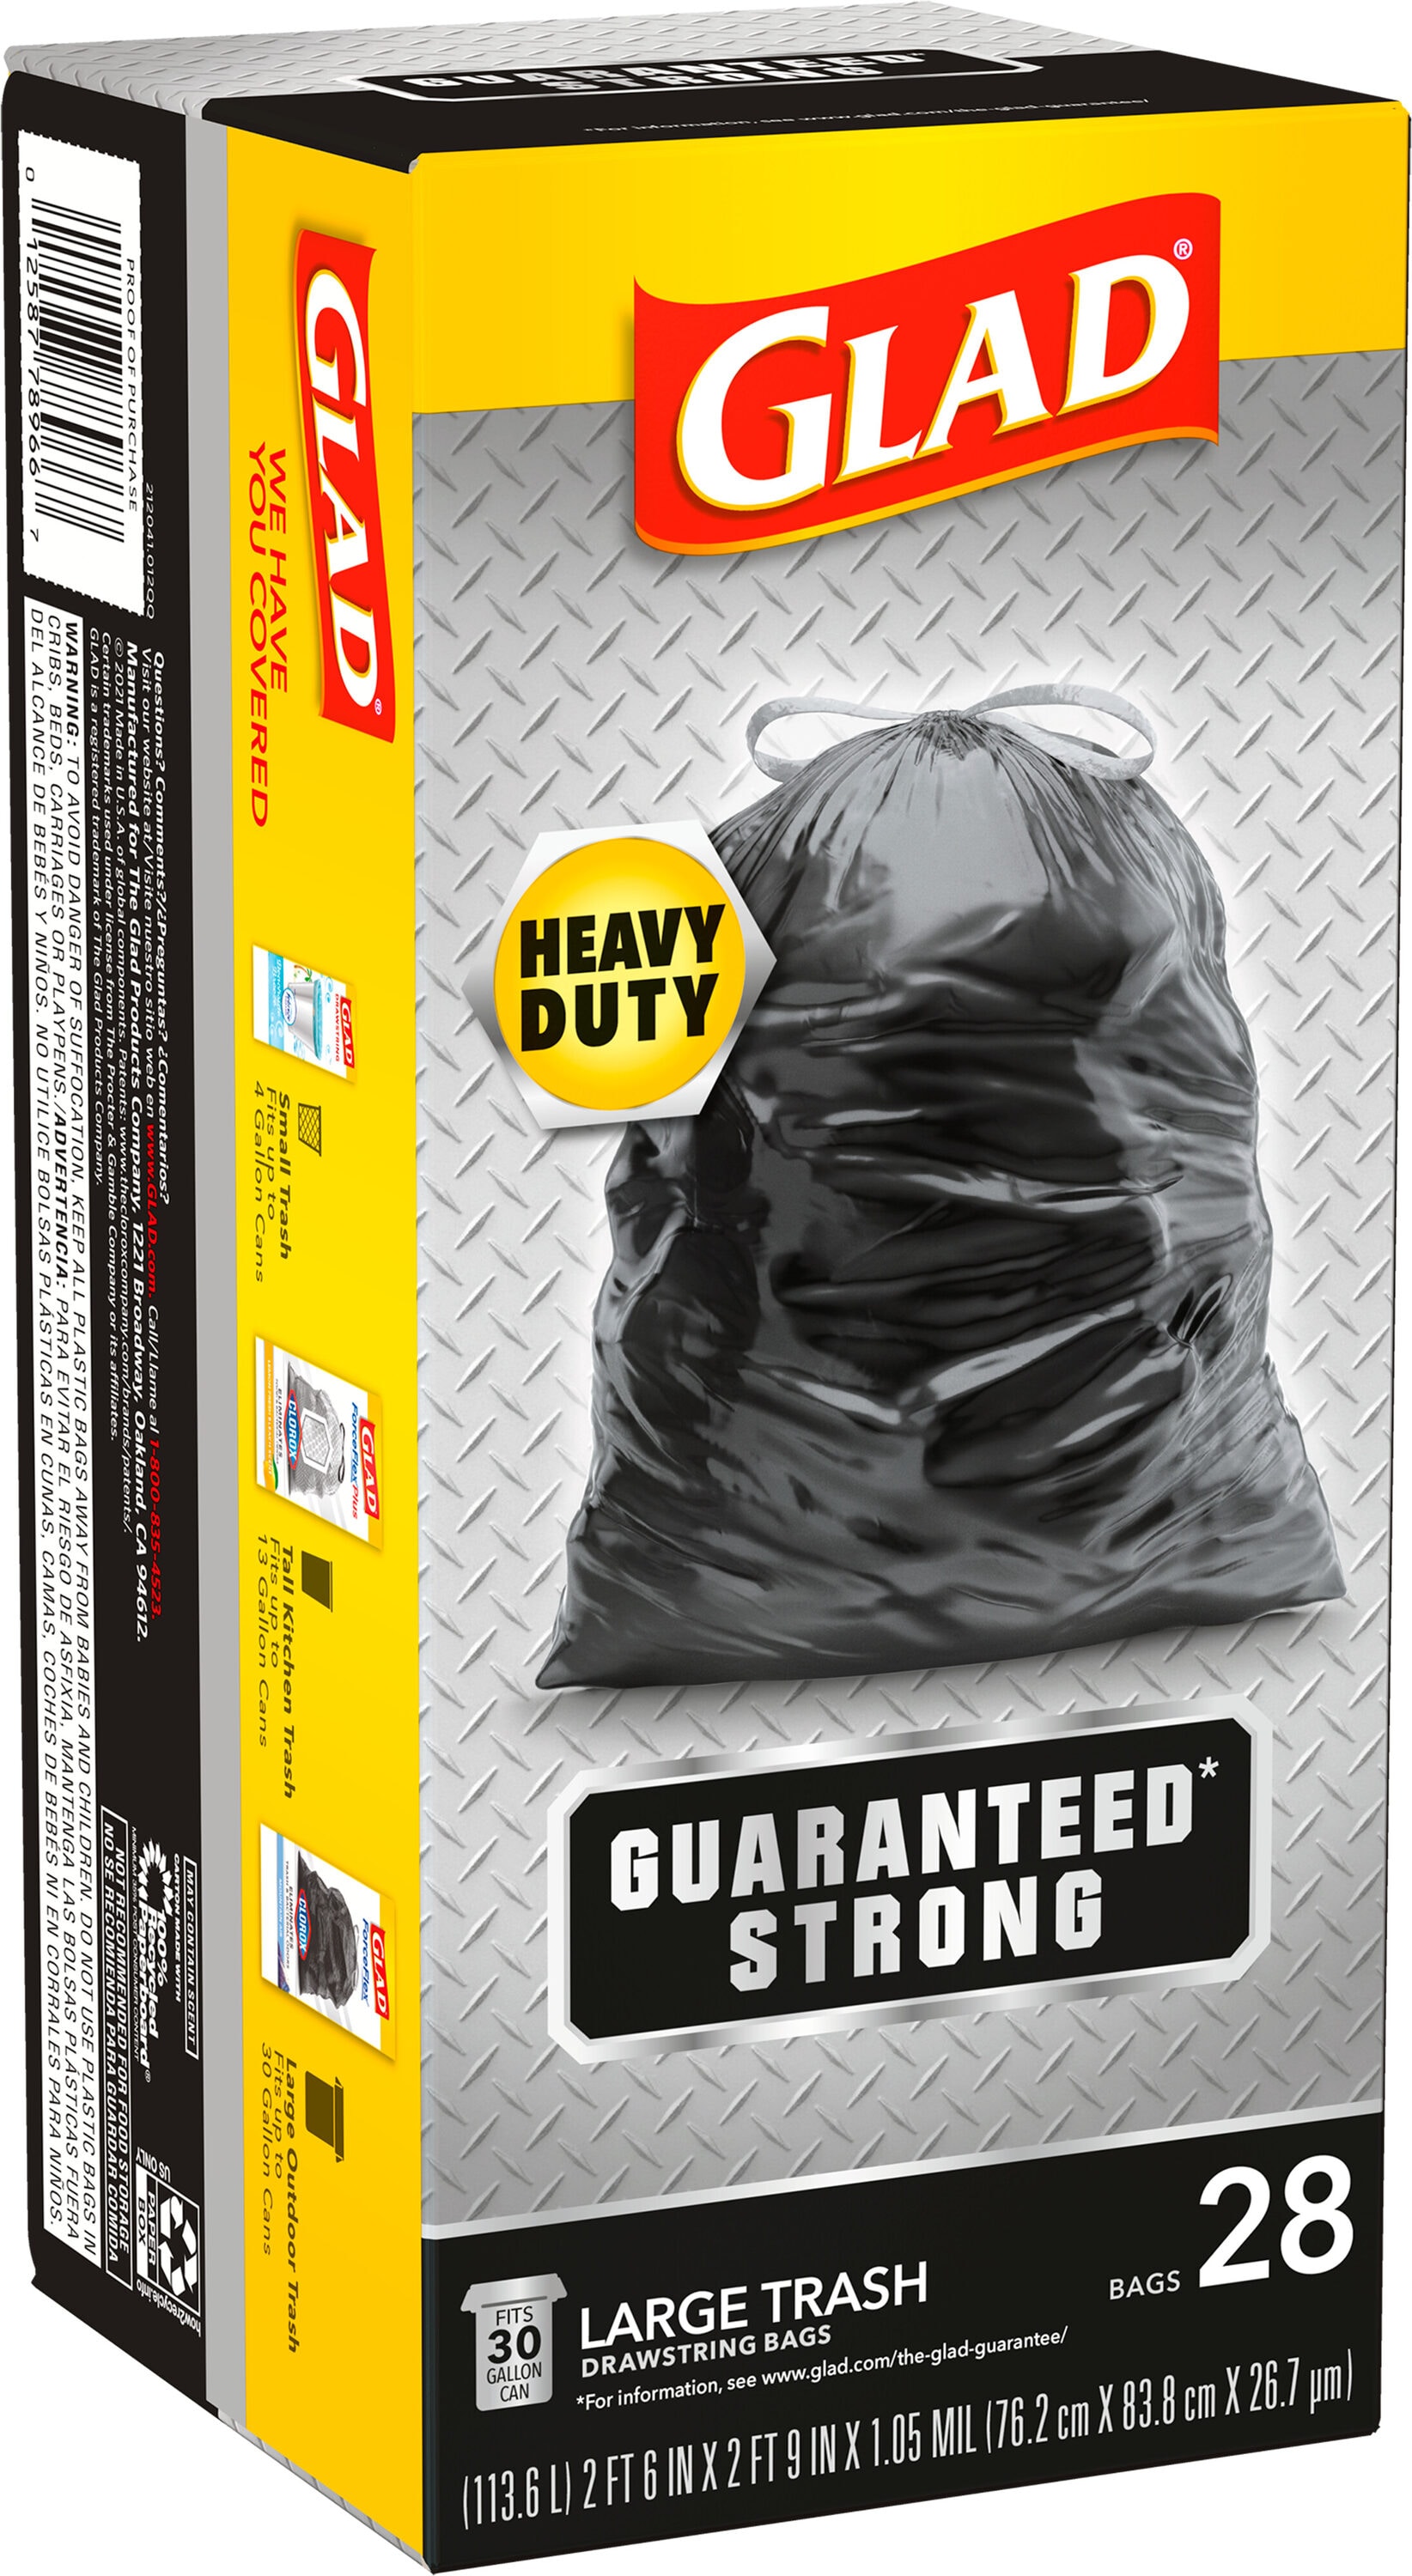 Hefty EasyFLAPS Trash Bags Black 30 Gallons Box Of 40 - Office Depot